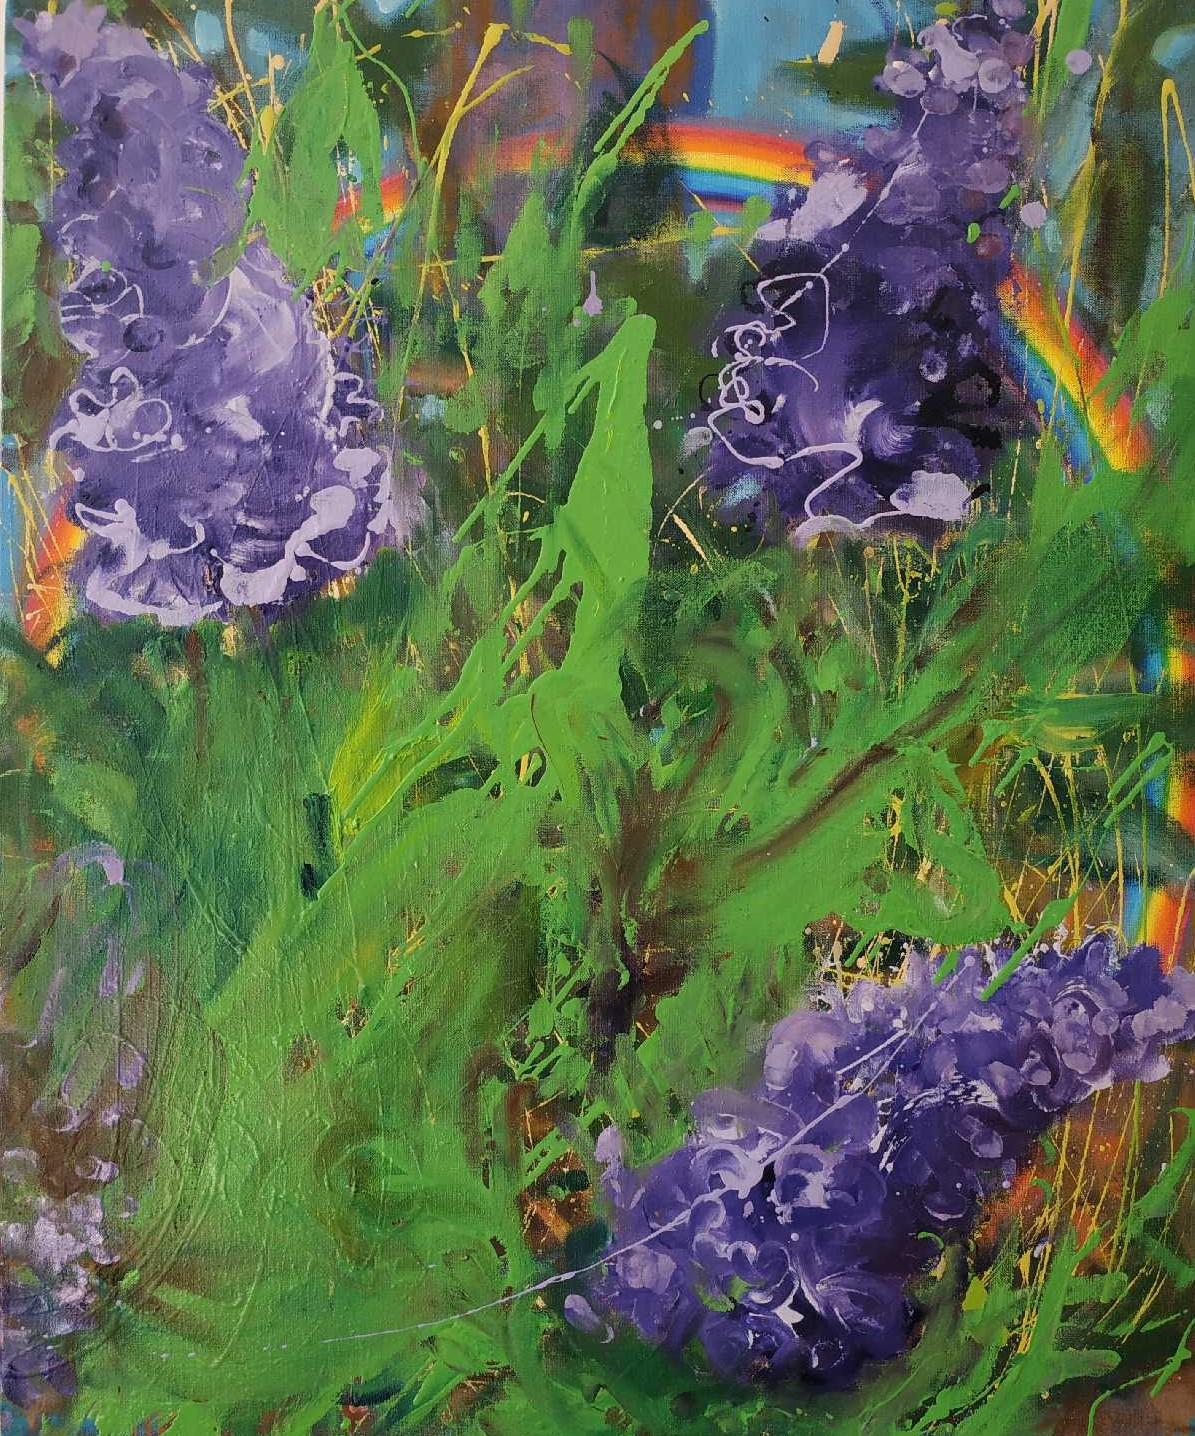 Lilac by Christophe Dupety - Contemporary painting, flora, purple, rainbow